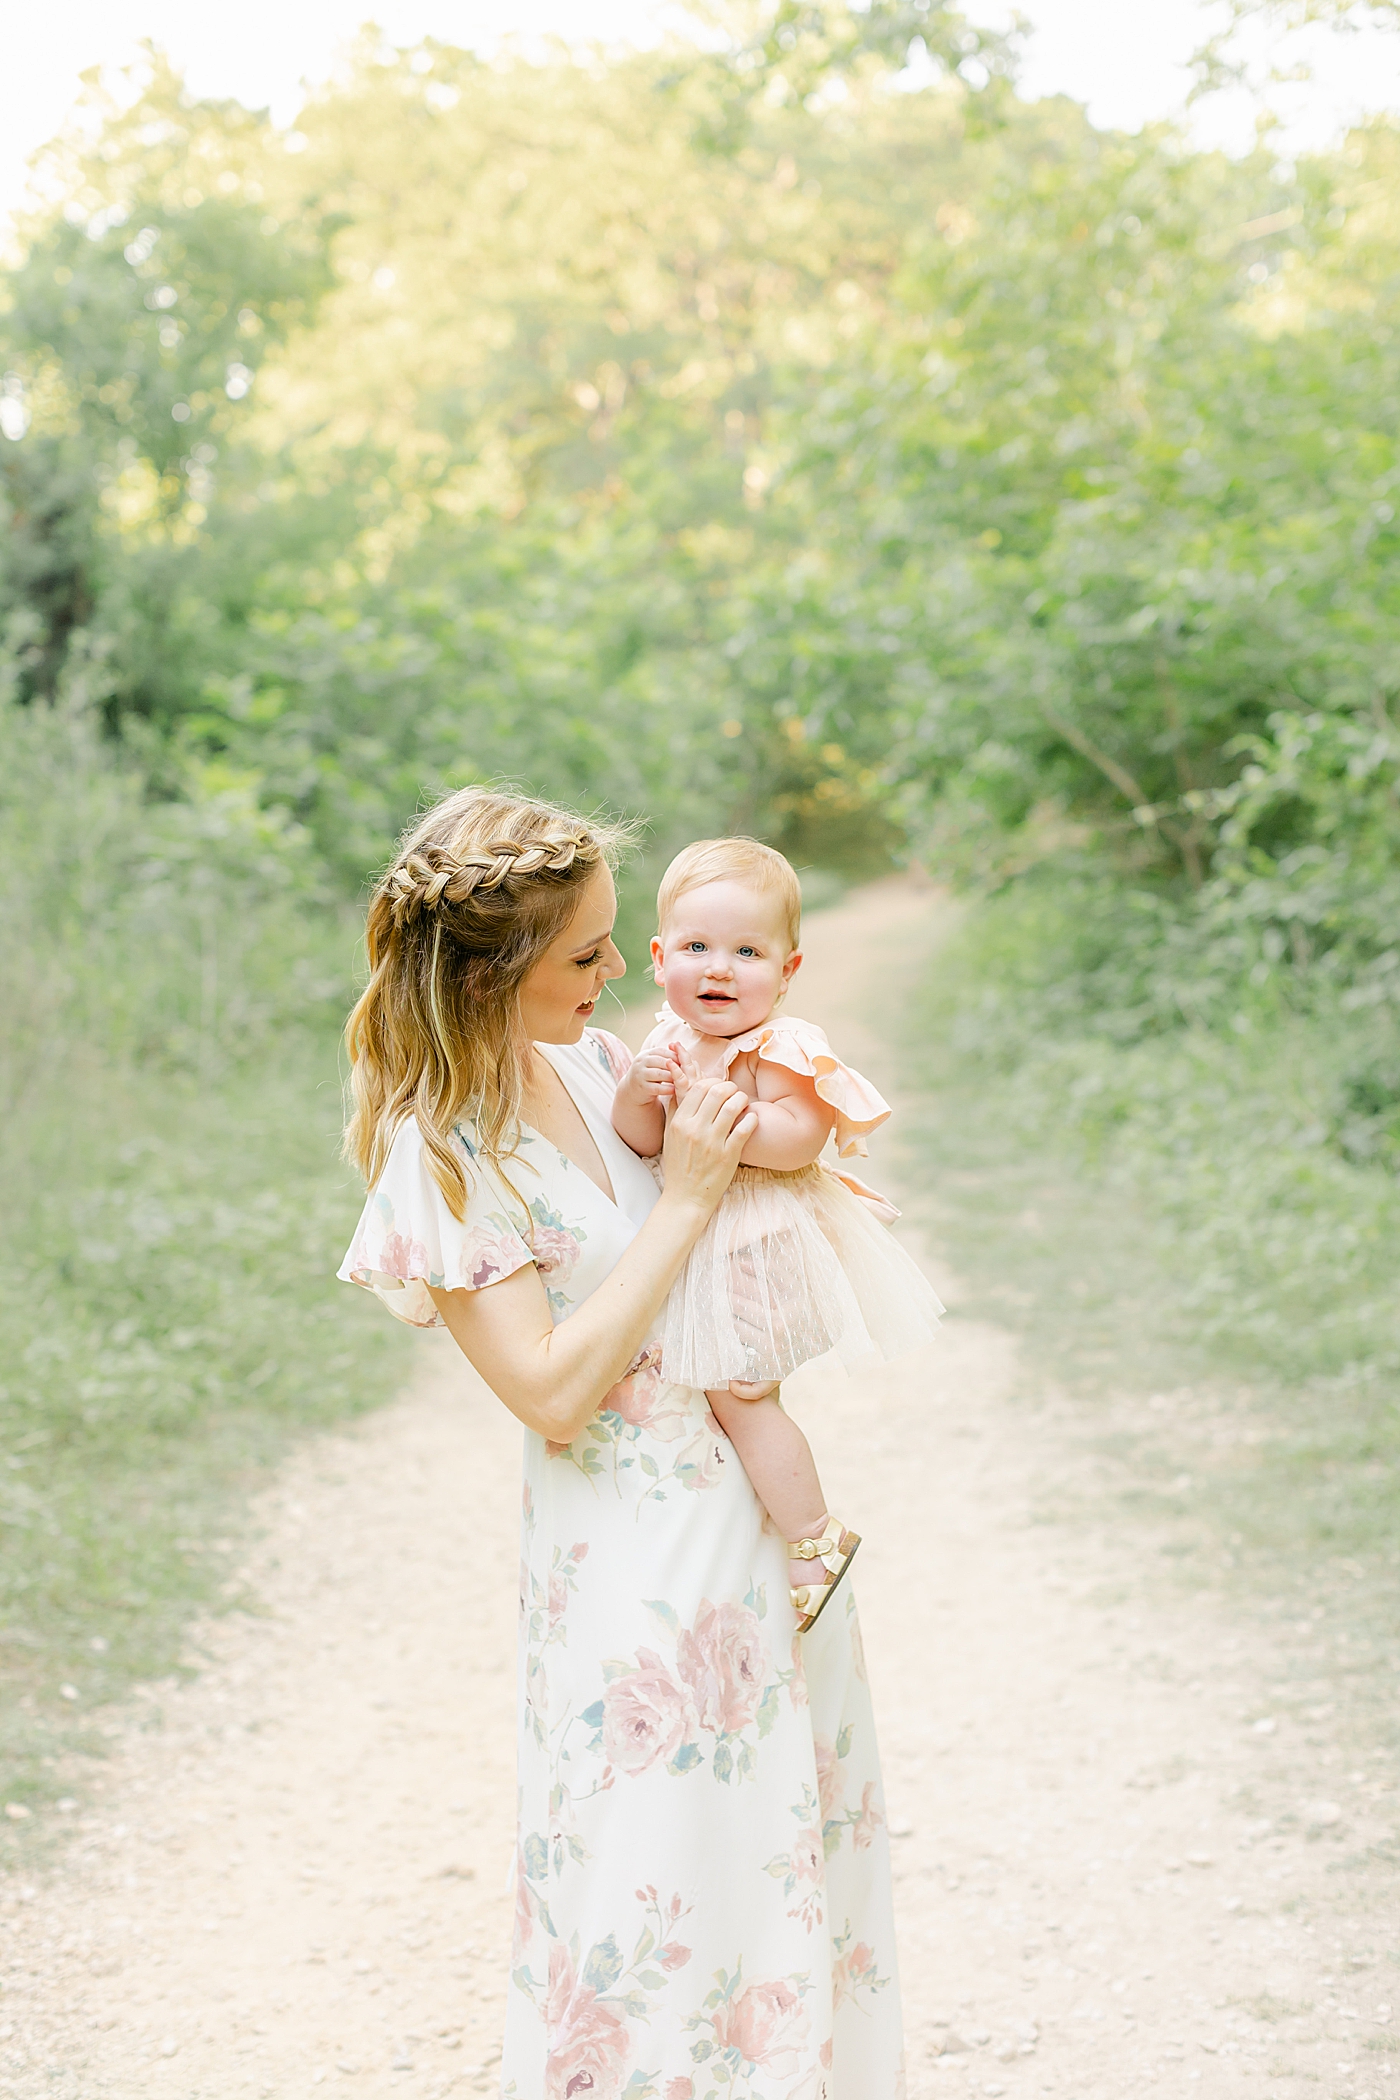 Mom in floral dress playing with her baby girl | Sana Ahmed Photography